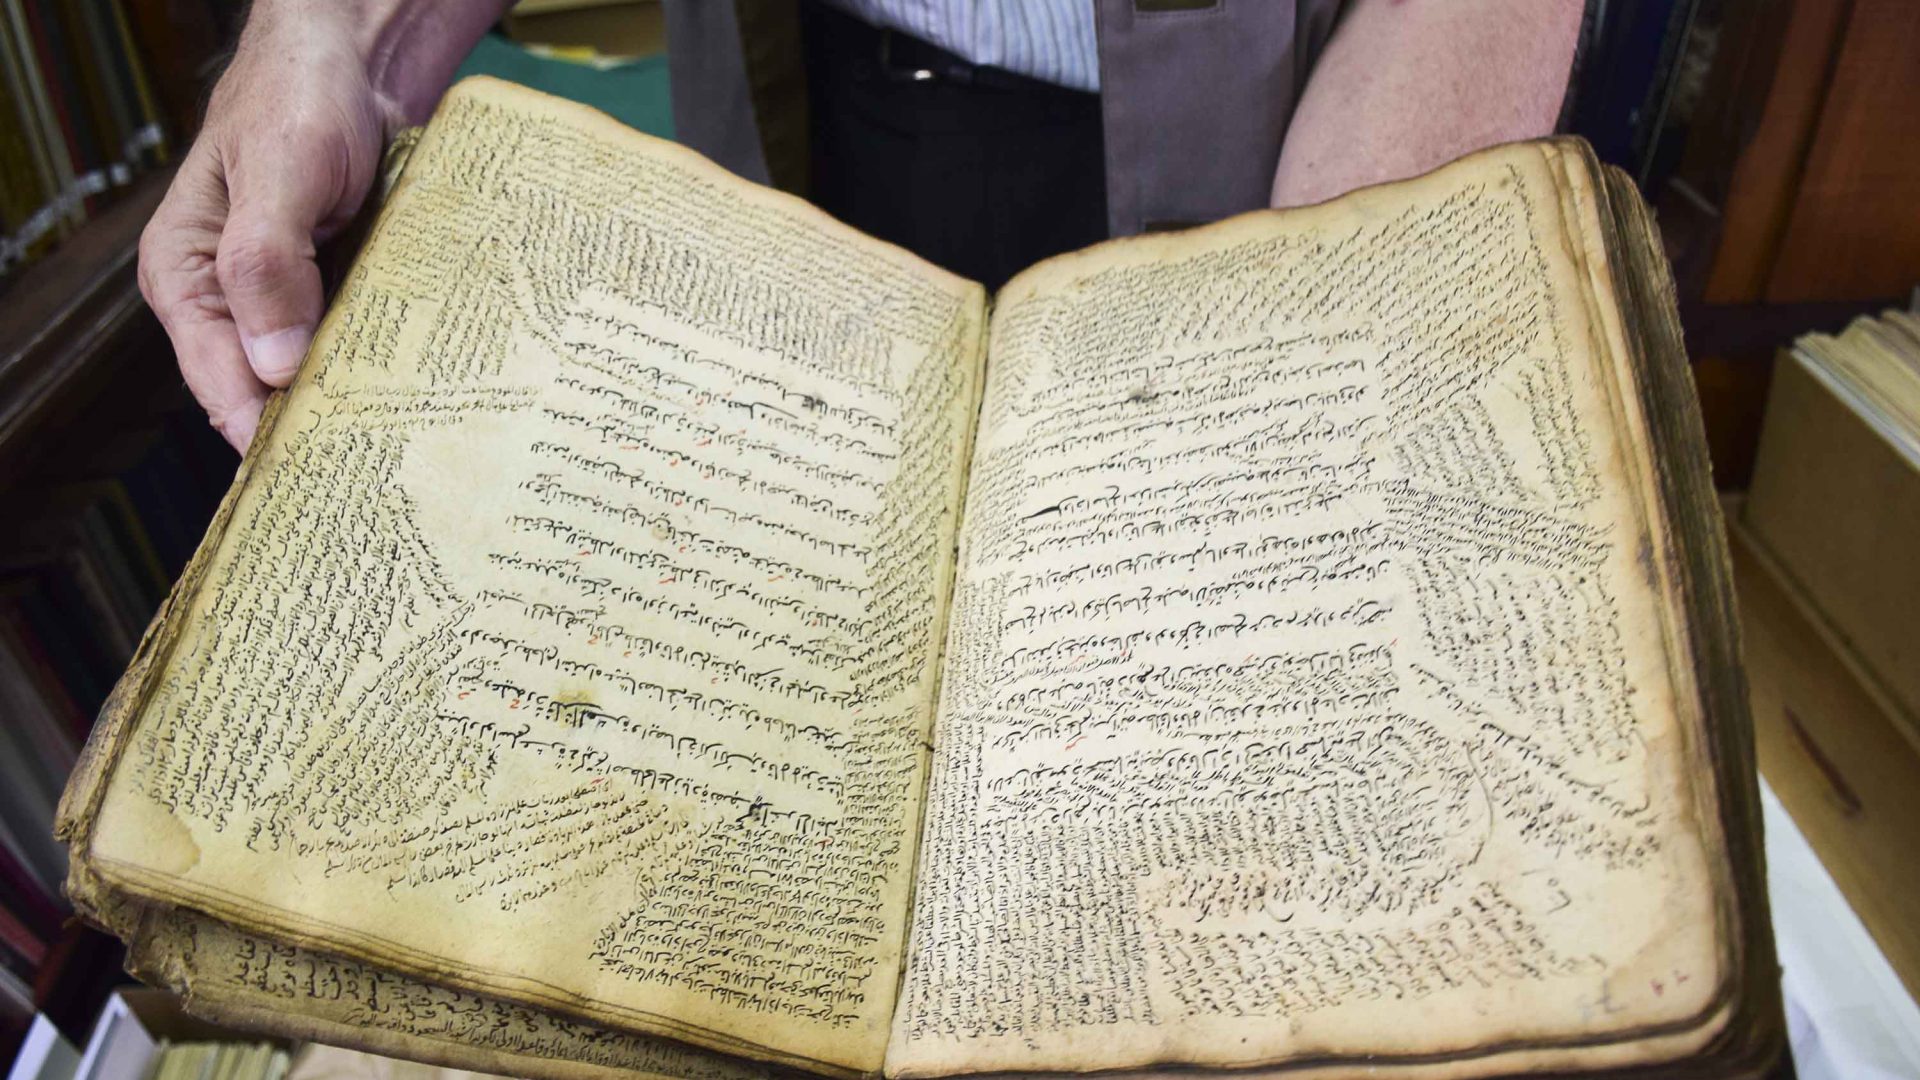 Close-up of ancient book of Islamic jurisprudence in library.